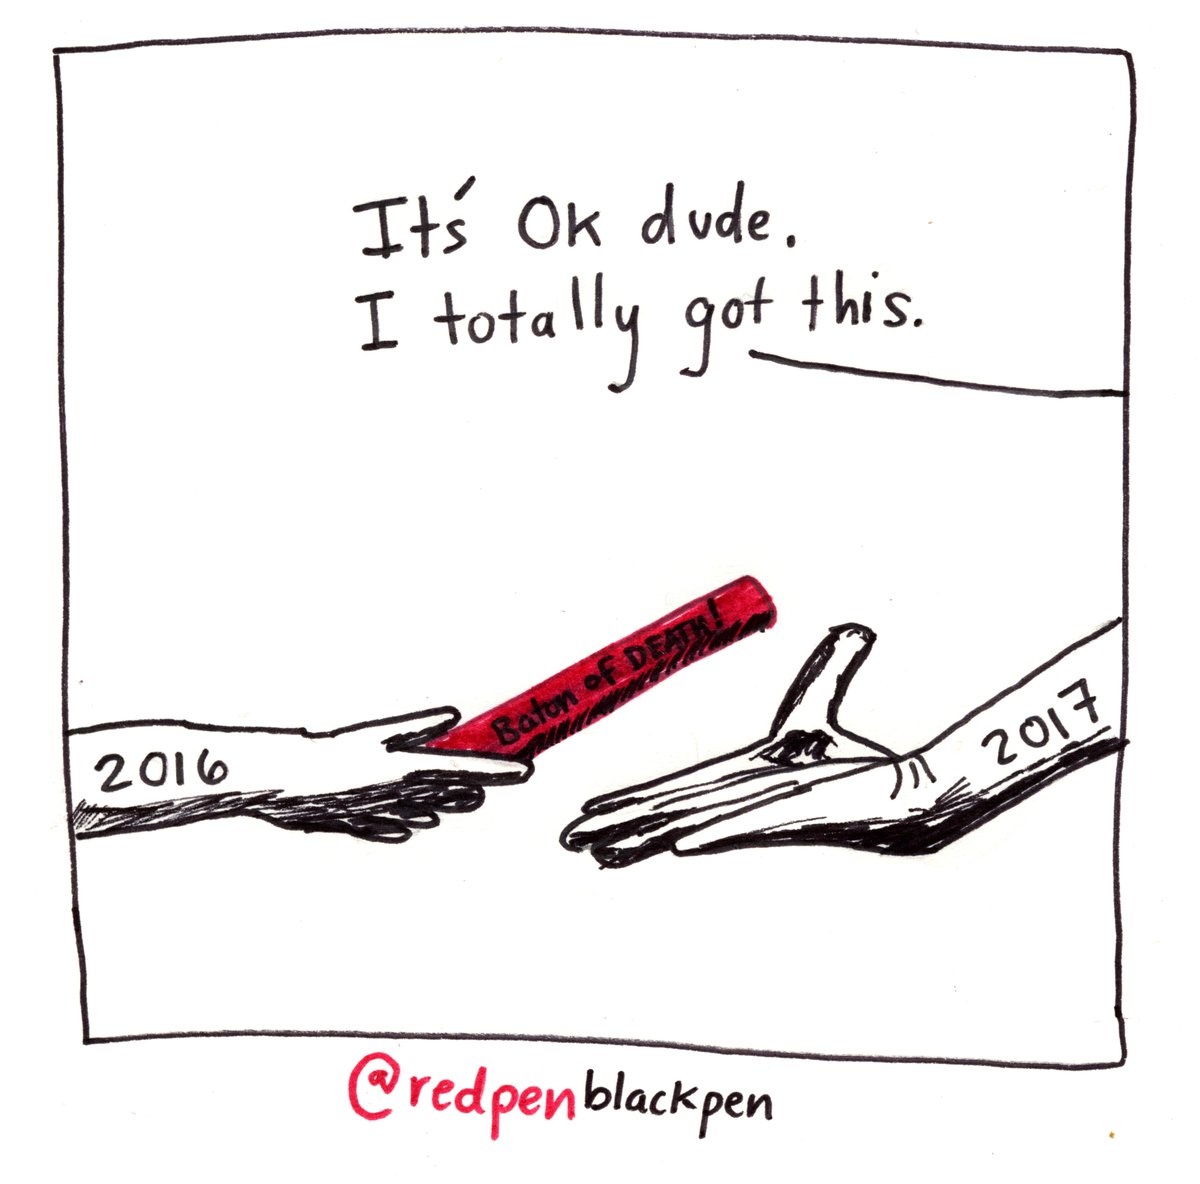 RedPen BlackPen On Twitter Continuing The Meme You Thought It Was